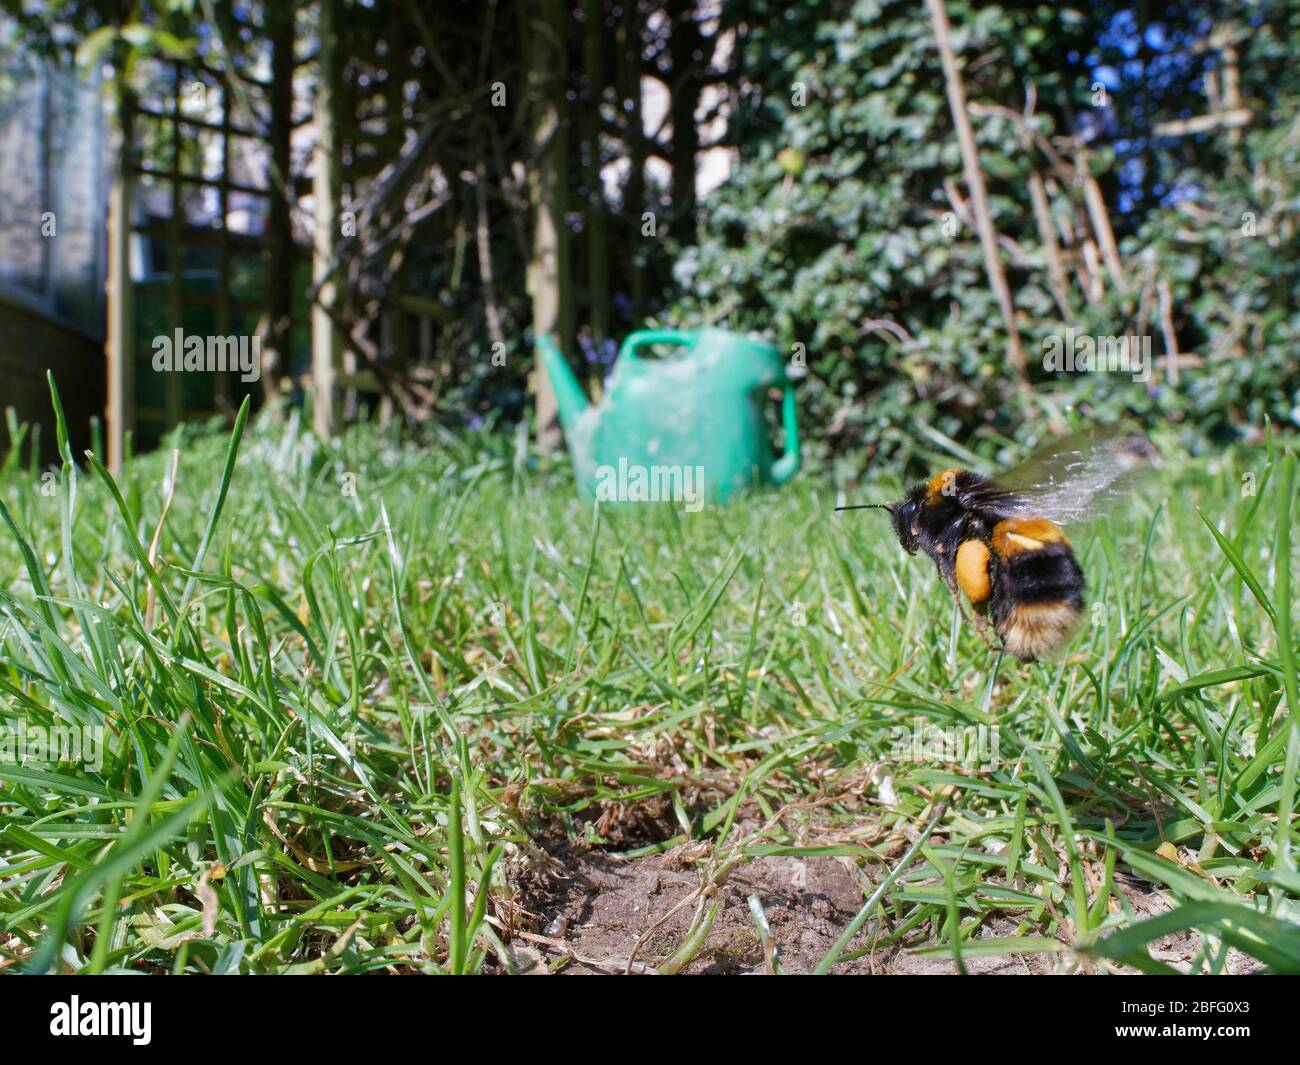 Buff-tailed bumblebee (Bombus terrestris) queen about to land at her nest burrow in a garden lawn with full pollen sacs to provision grubs that will b Stock Photo